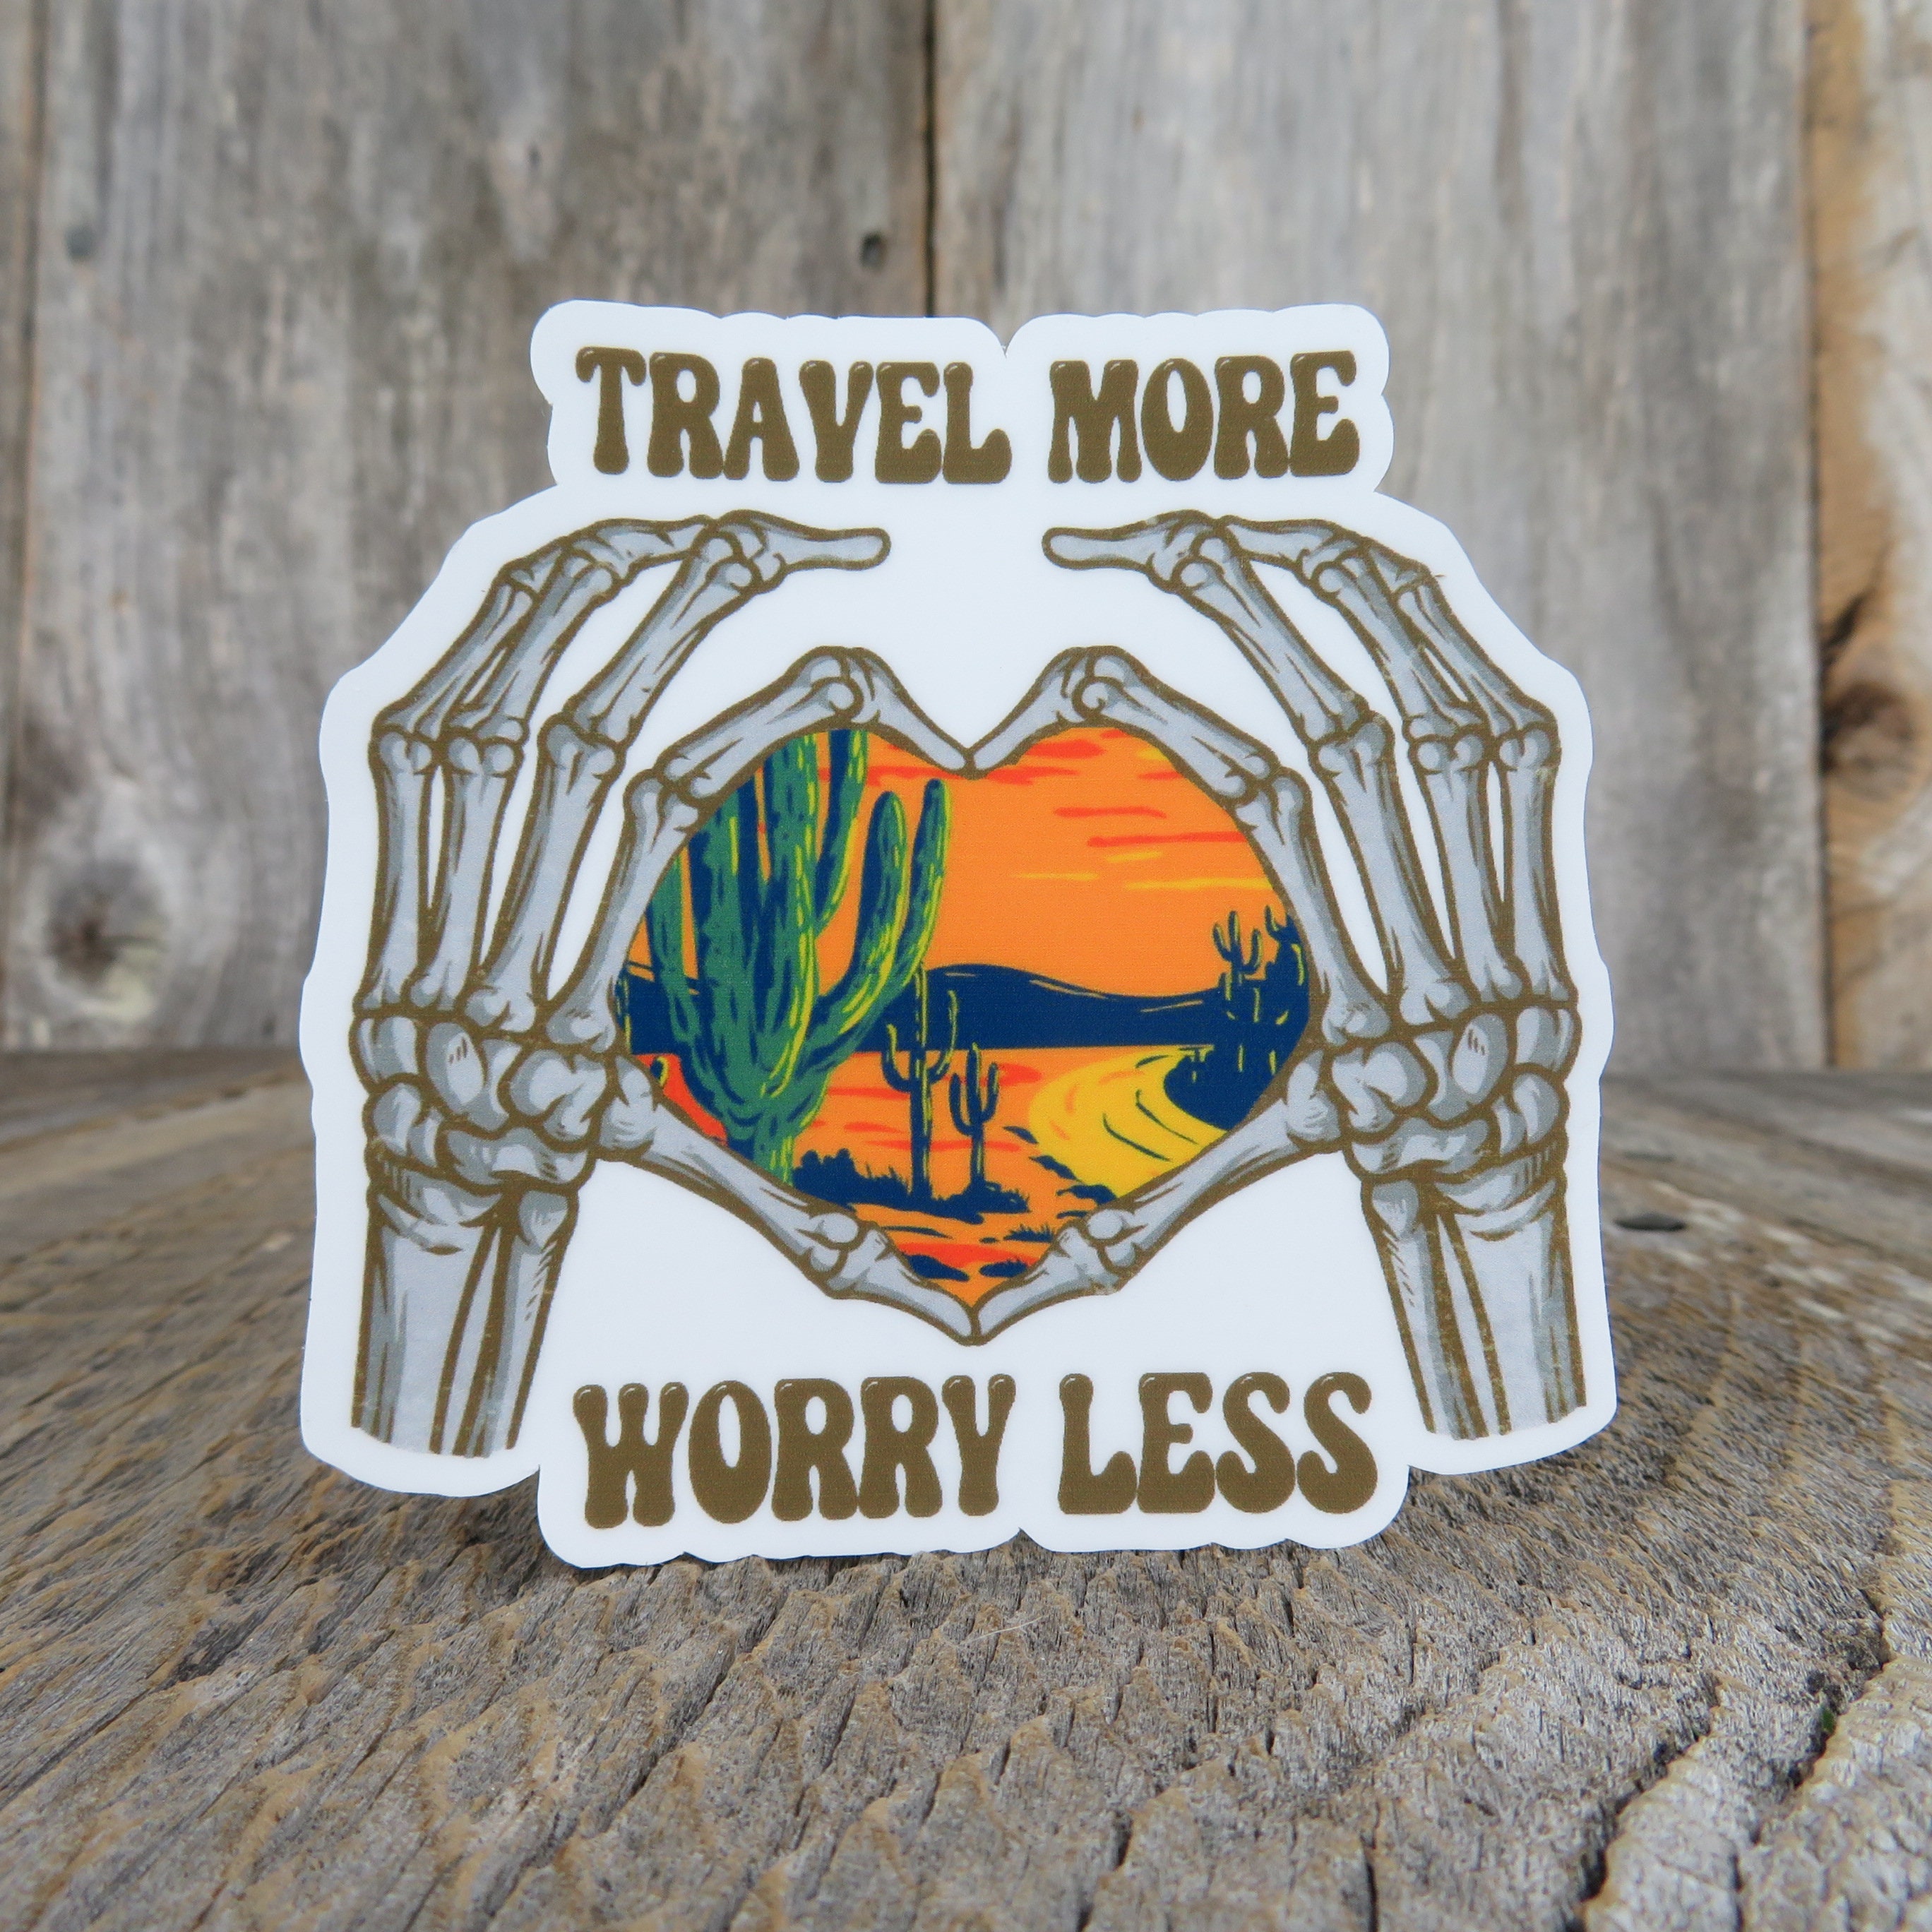 Create More Worry Less Holographic Sticker